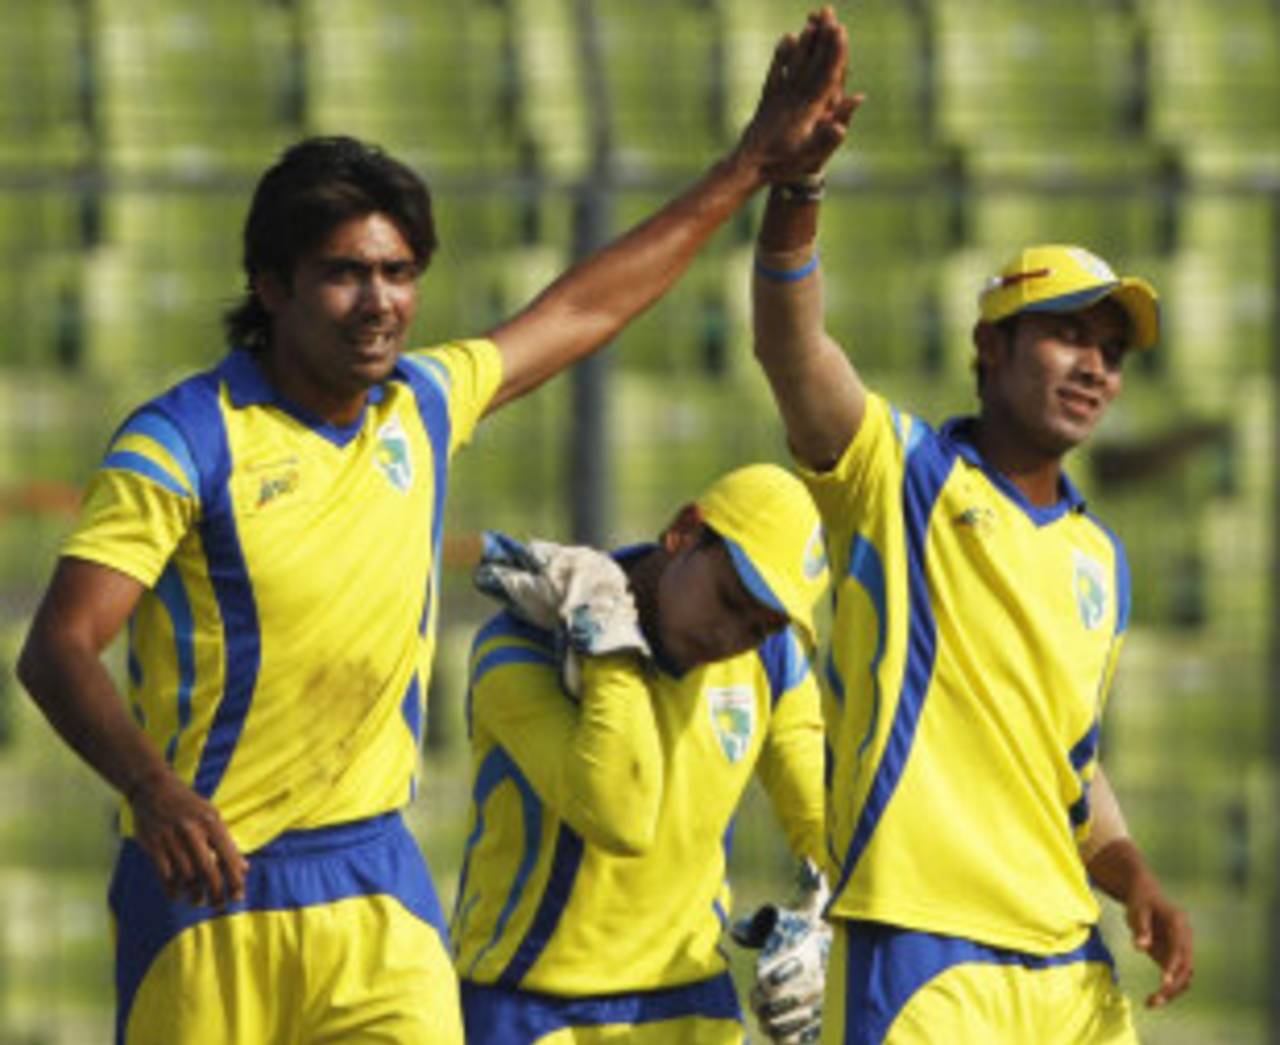 Mohammad Sami claimed four wickets and scored 122 in the match&nbsp;&nbsp;&bull;&nbsp;&nbsp;BPL T20